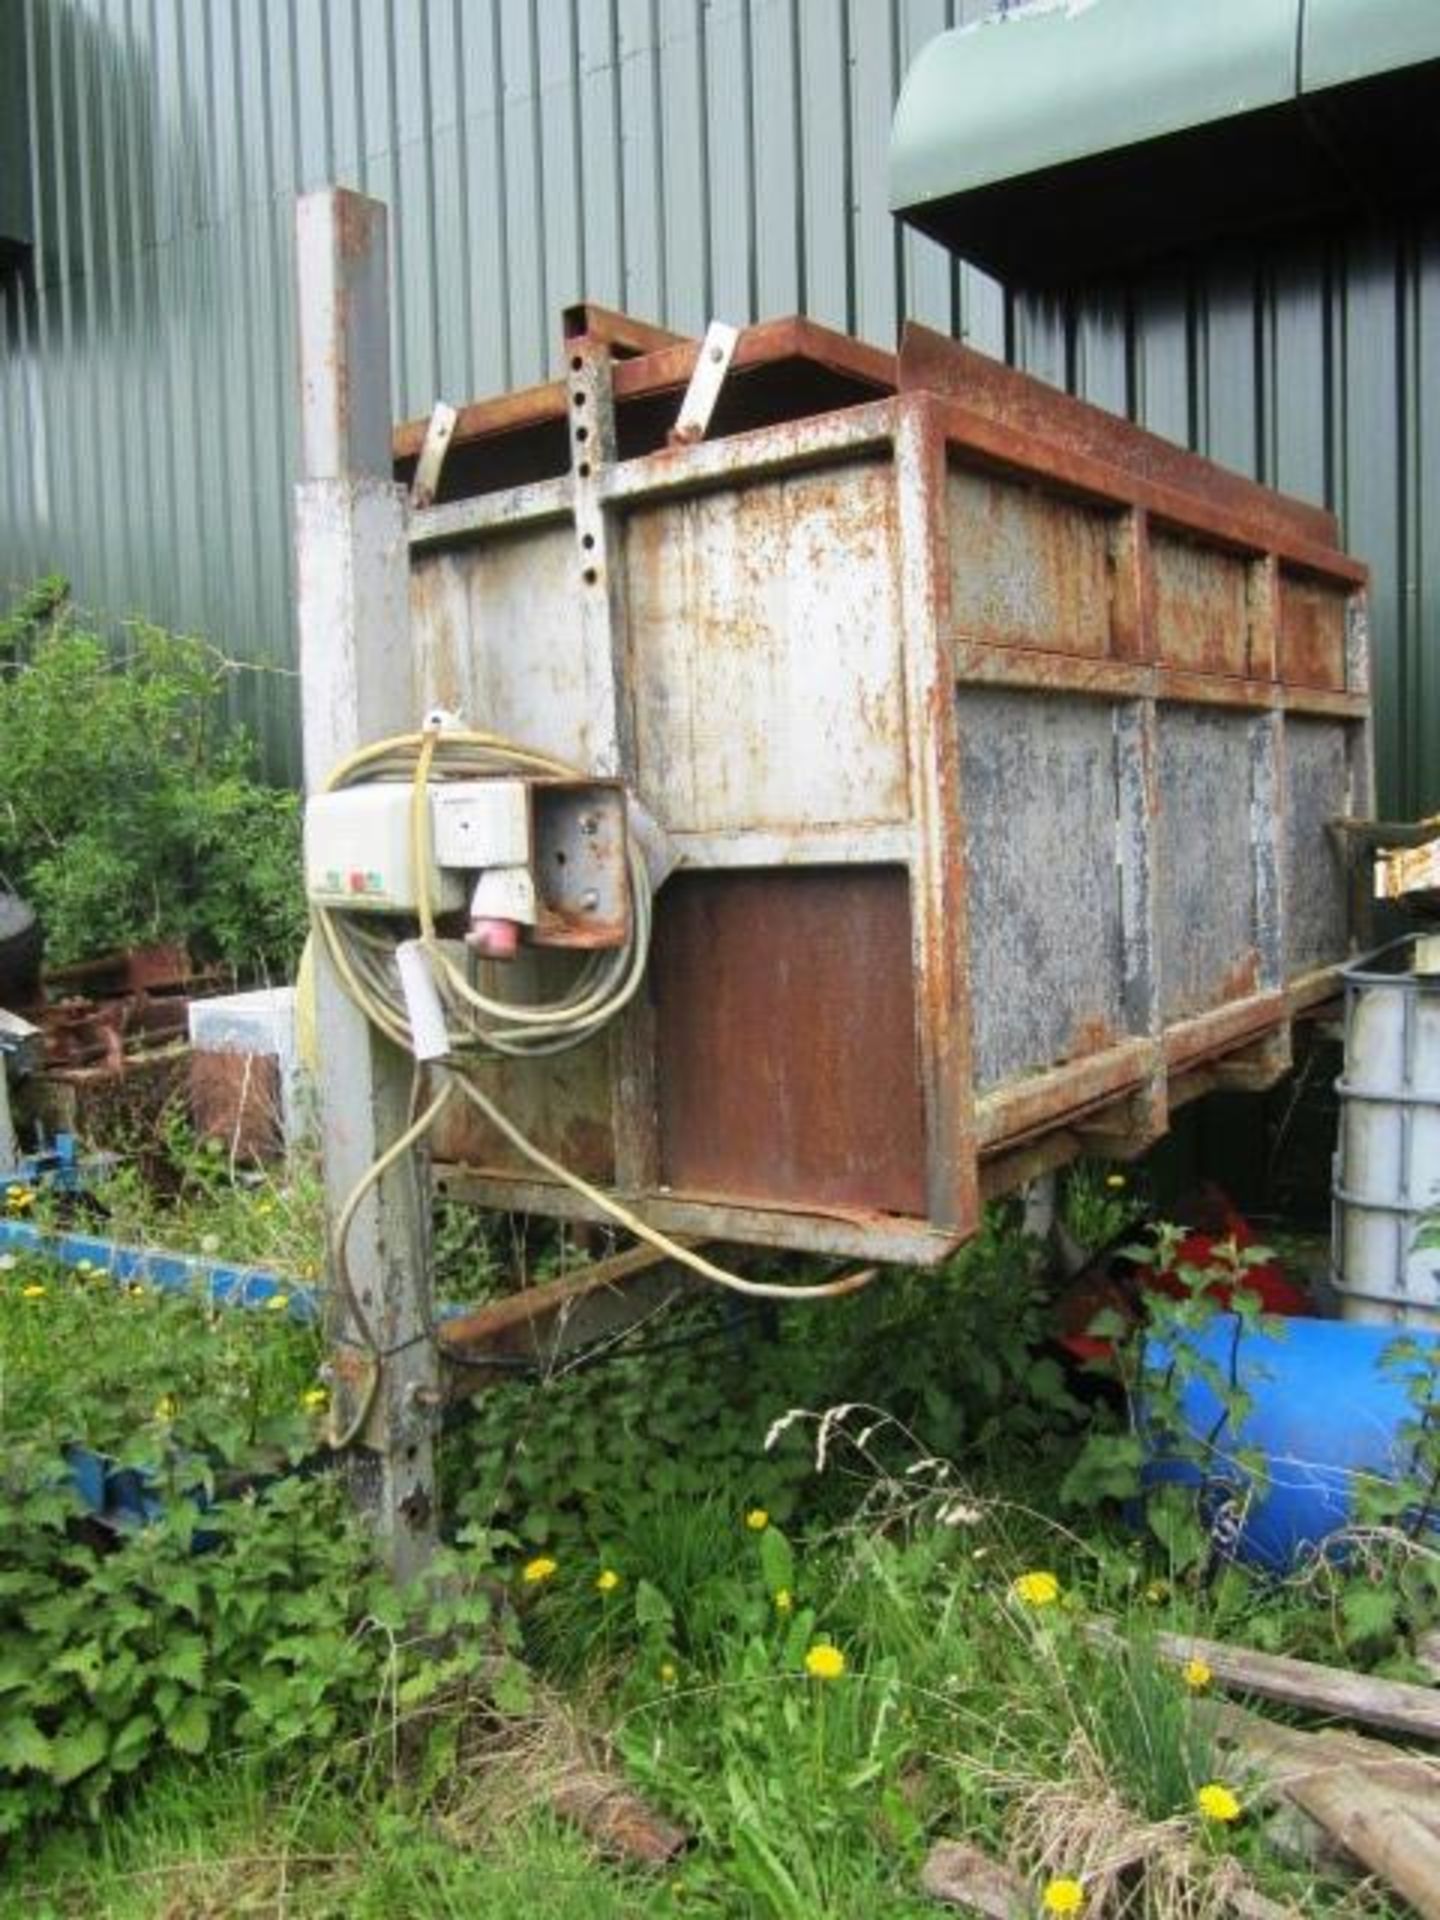 Potato box tipper with series 2000 control, approx. size 1.1m x 2m - for spares or repair (Please